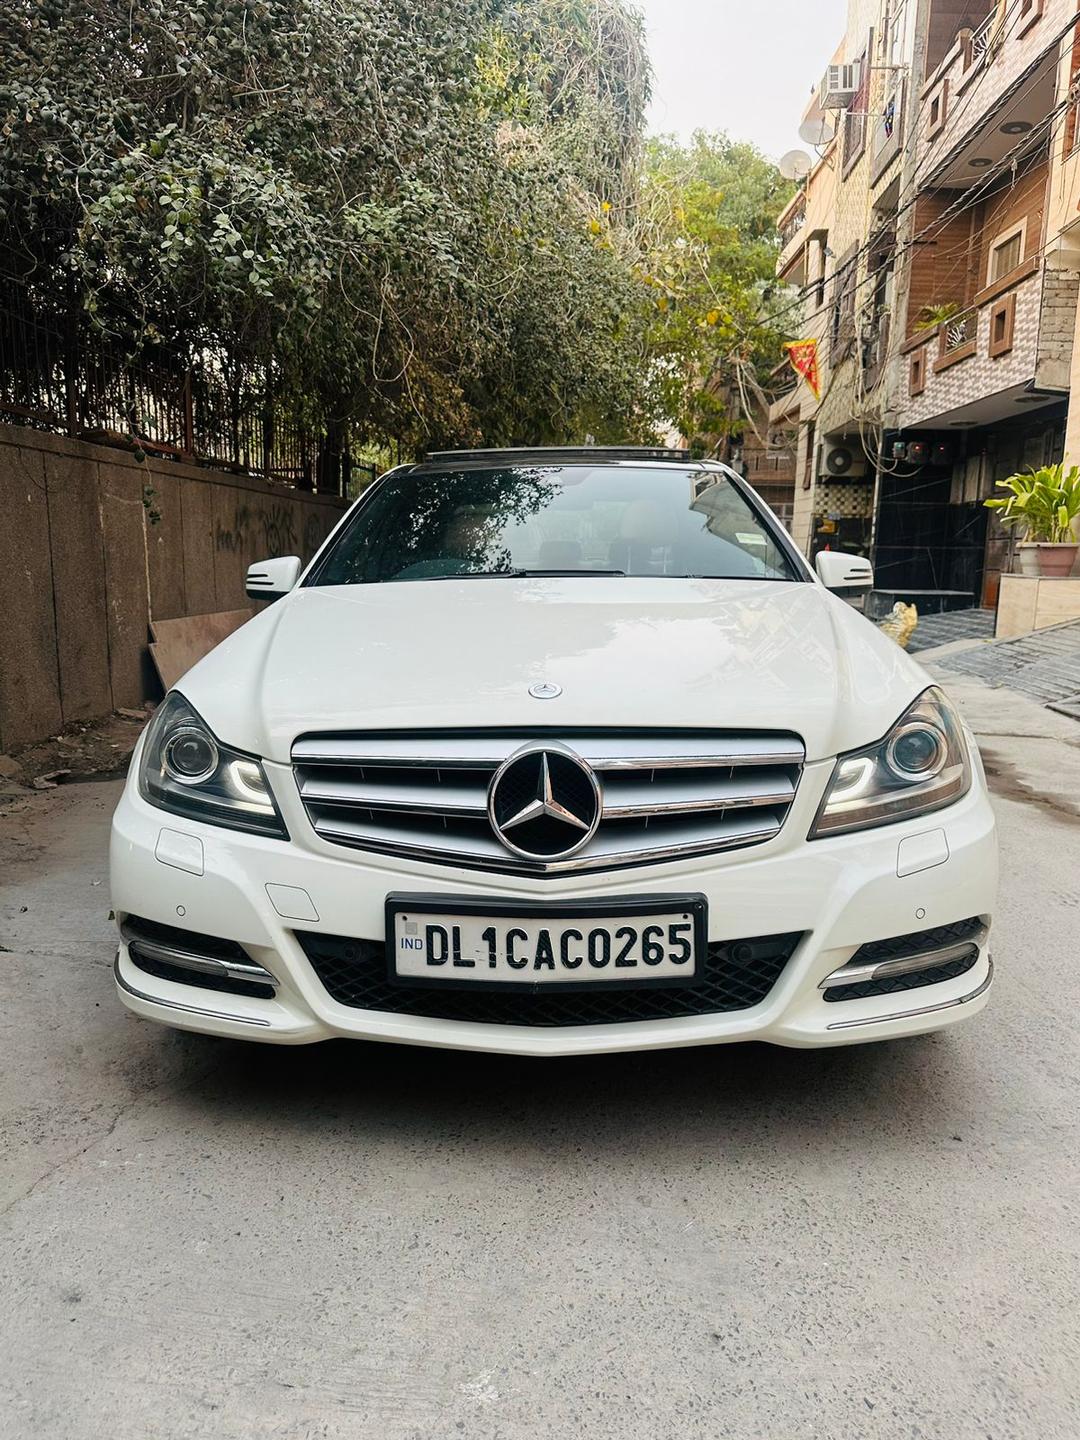 2011 MERCEDES C CLASS 2ND OWNER 65000 KMS DRIVEN